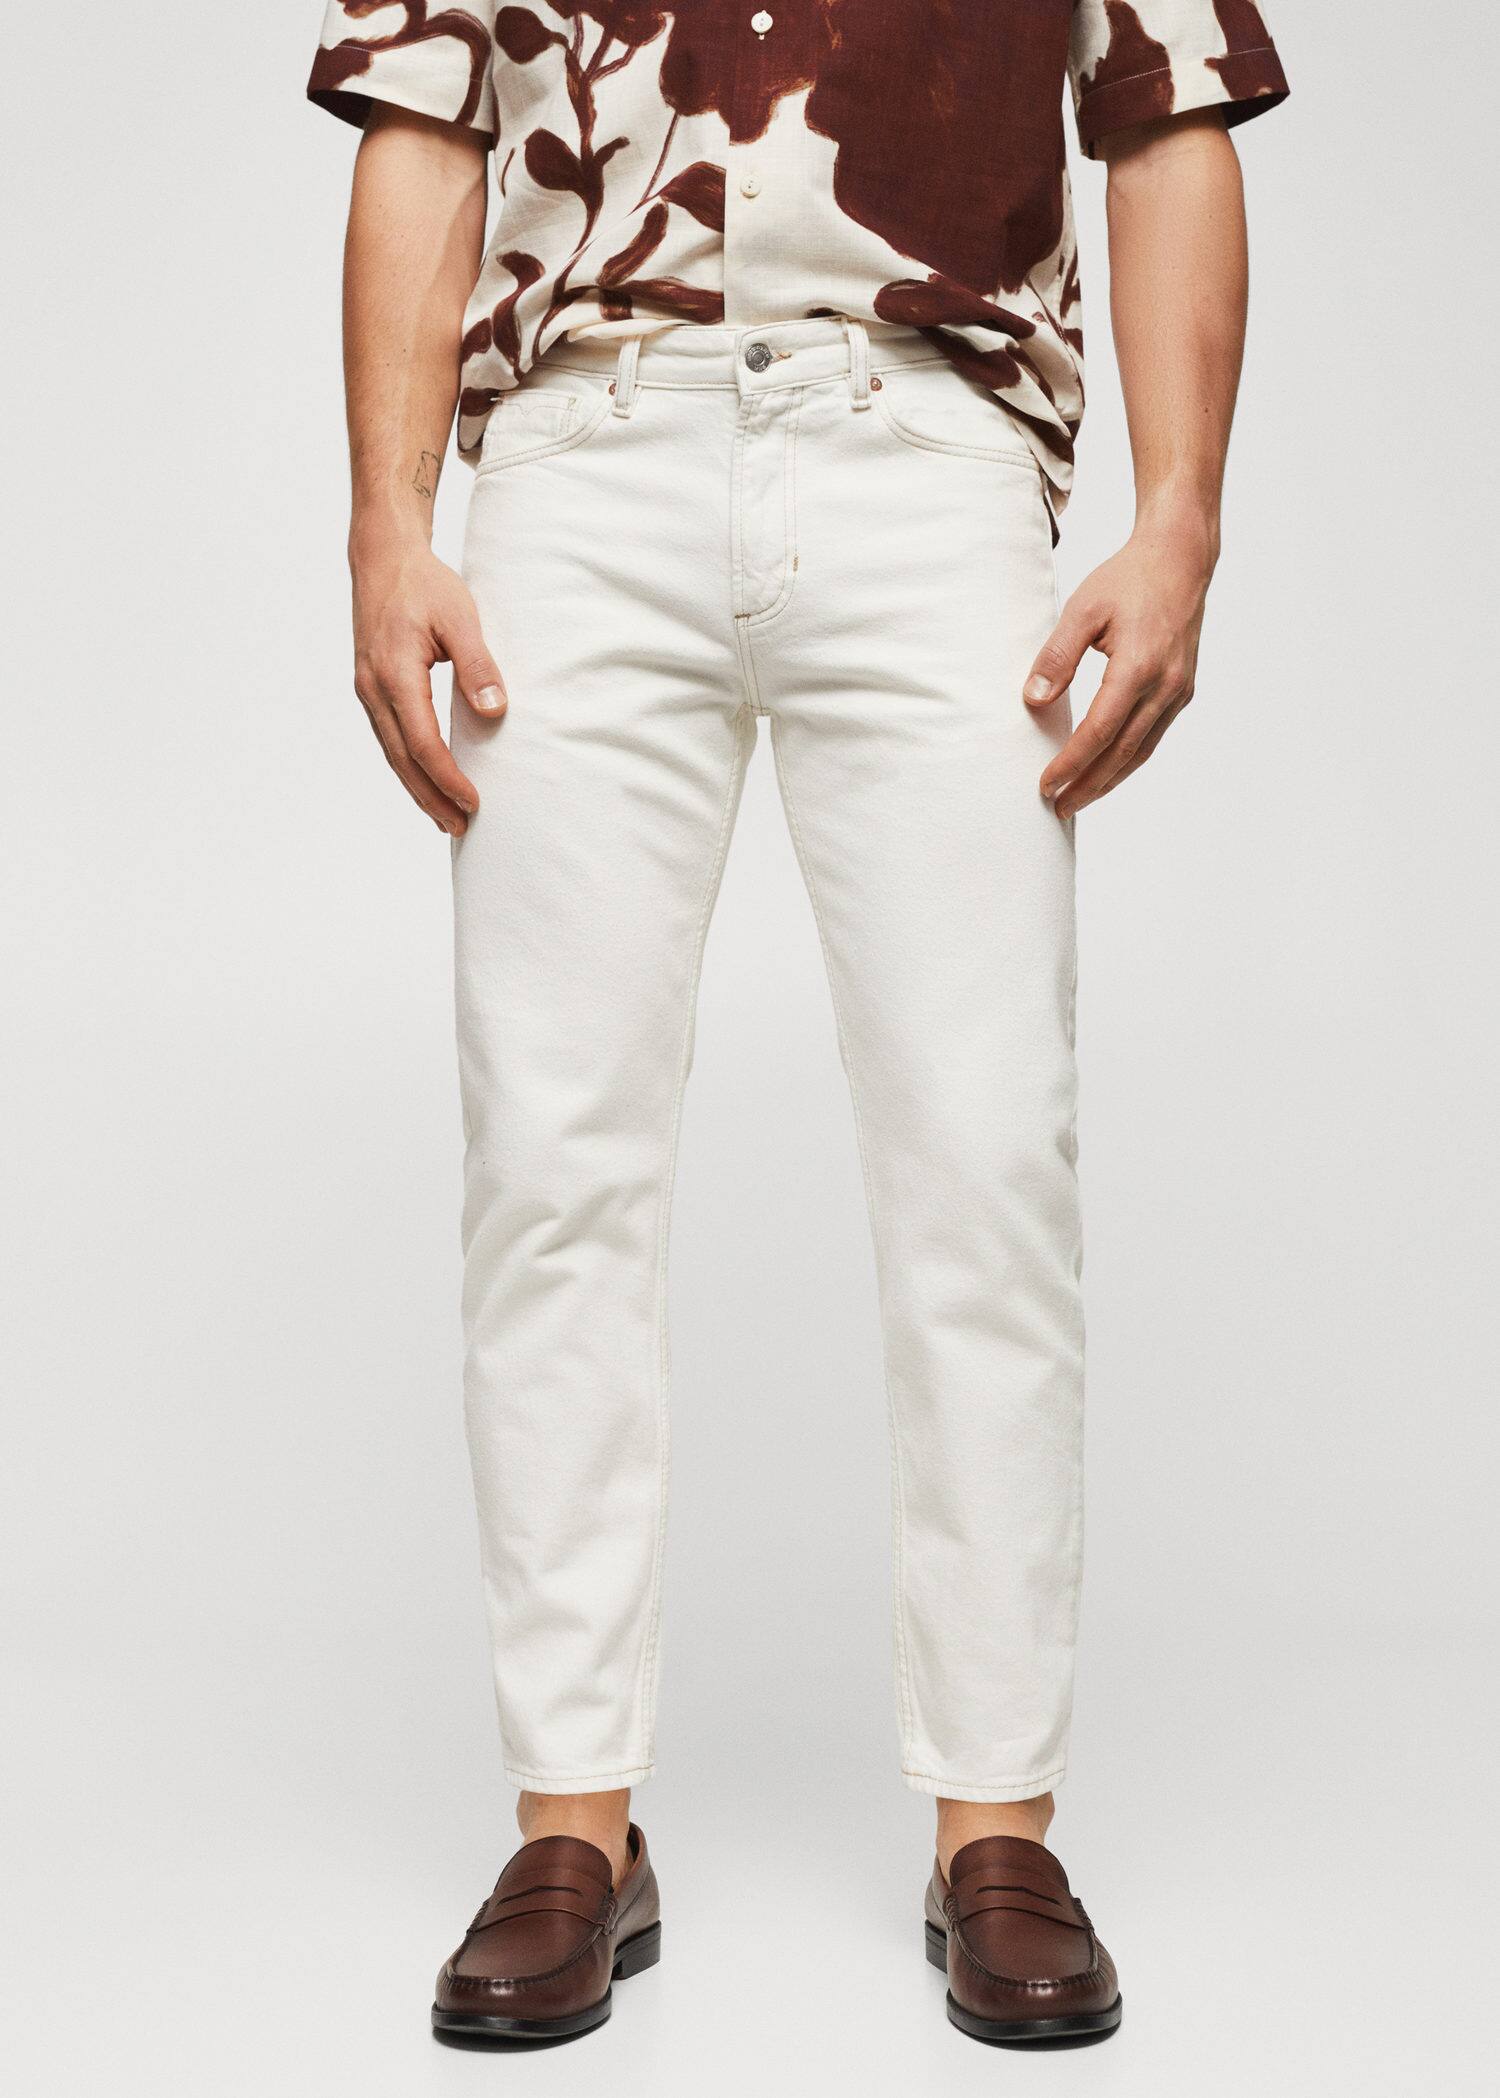 Jeans Ben tapered e cropped - Plano médio